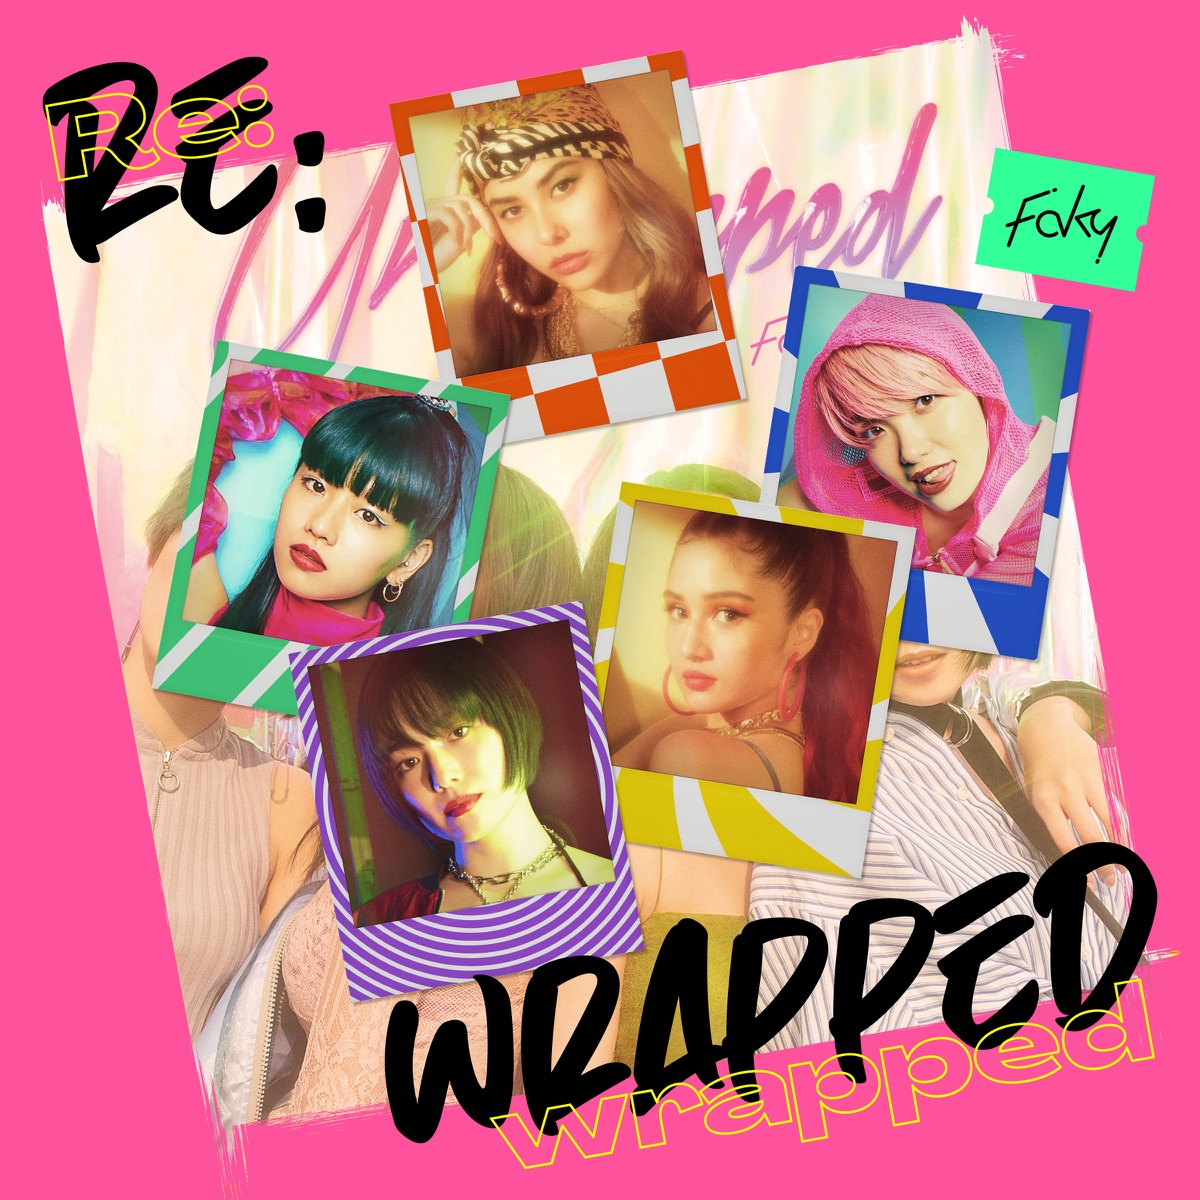 『FAKY - Re:Candy』収録の『Re:wrapped』ジャケット